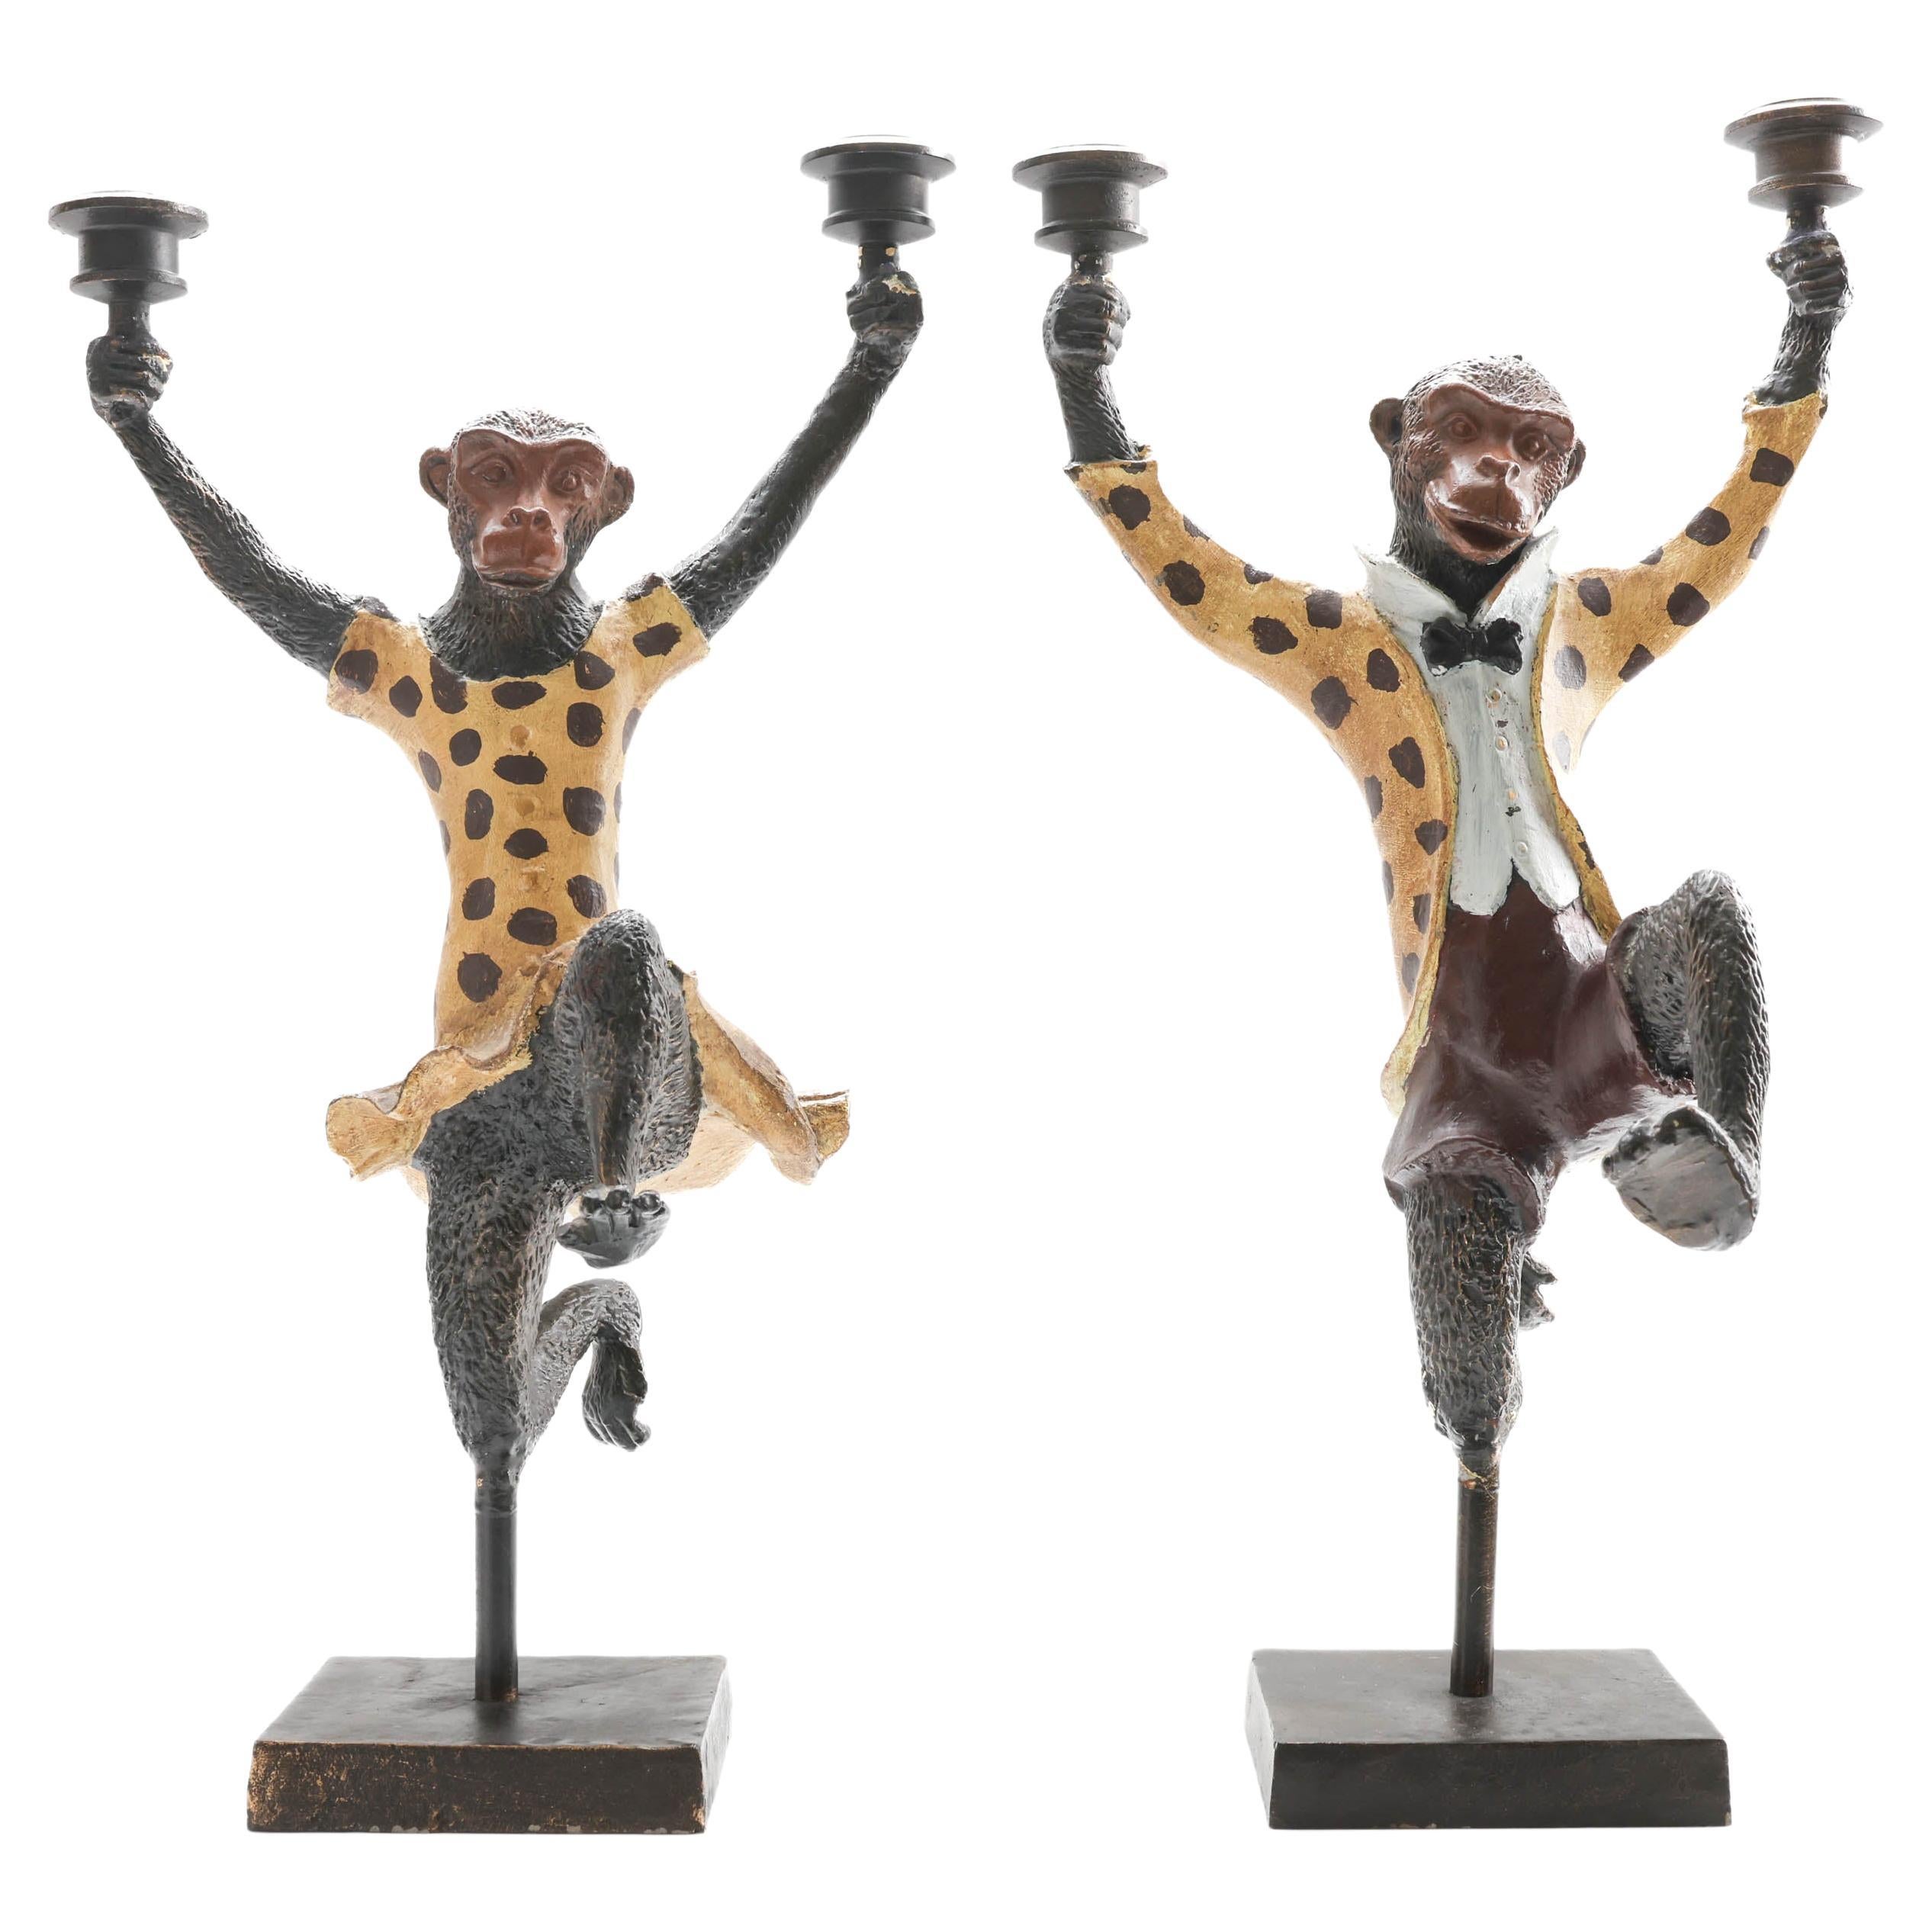 Pair Dancing Monkeys Costumed Iron Figurine Candelabras  Scully & Scully